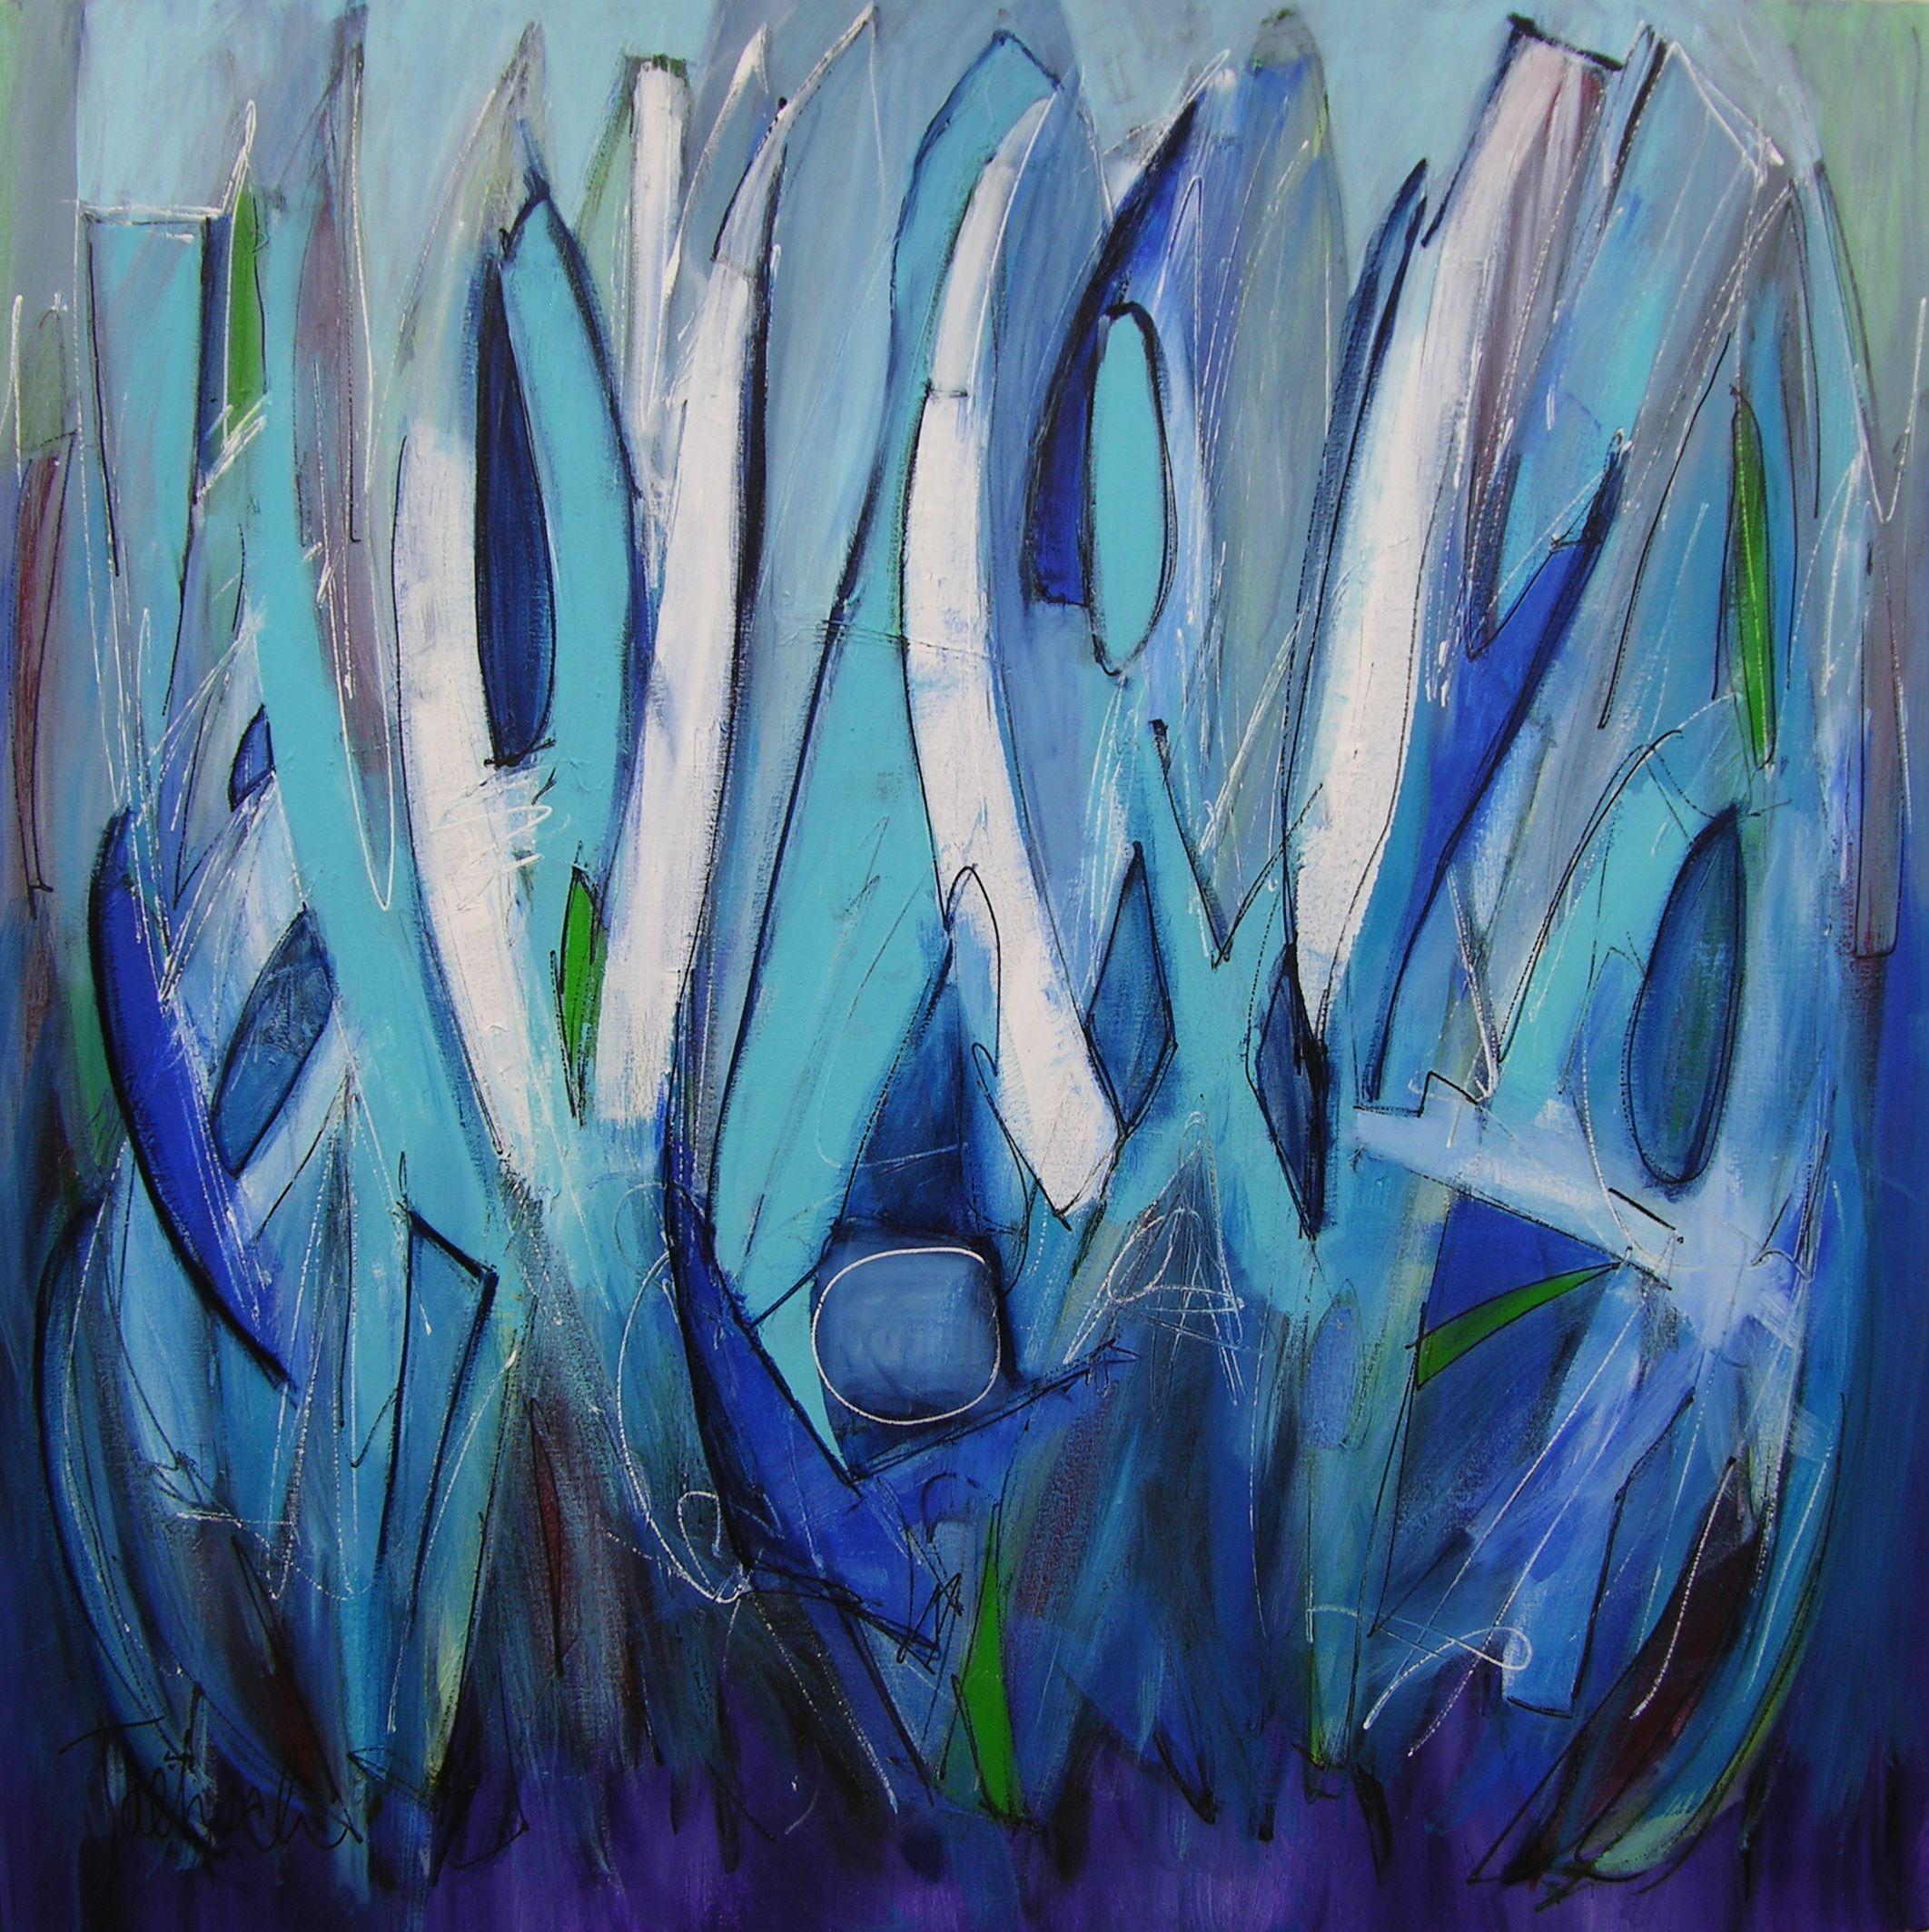 48" x 48" x 1.5" original painting on stretched canvas, with the image continuing around the sides so that no frame is required.  It comes with picture wire ready to hang.    This is a tender painting, rising from the depths of deep blue to reach